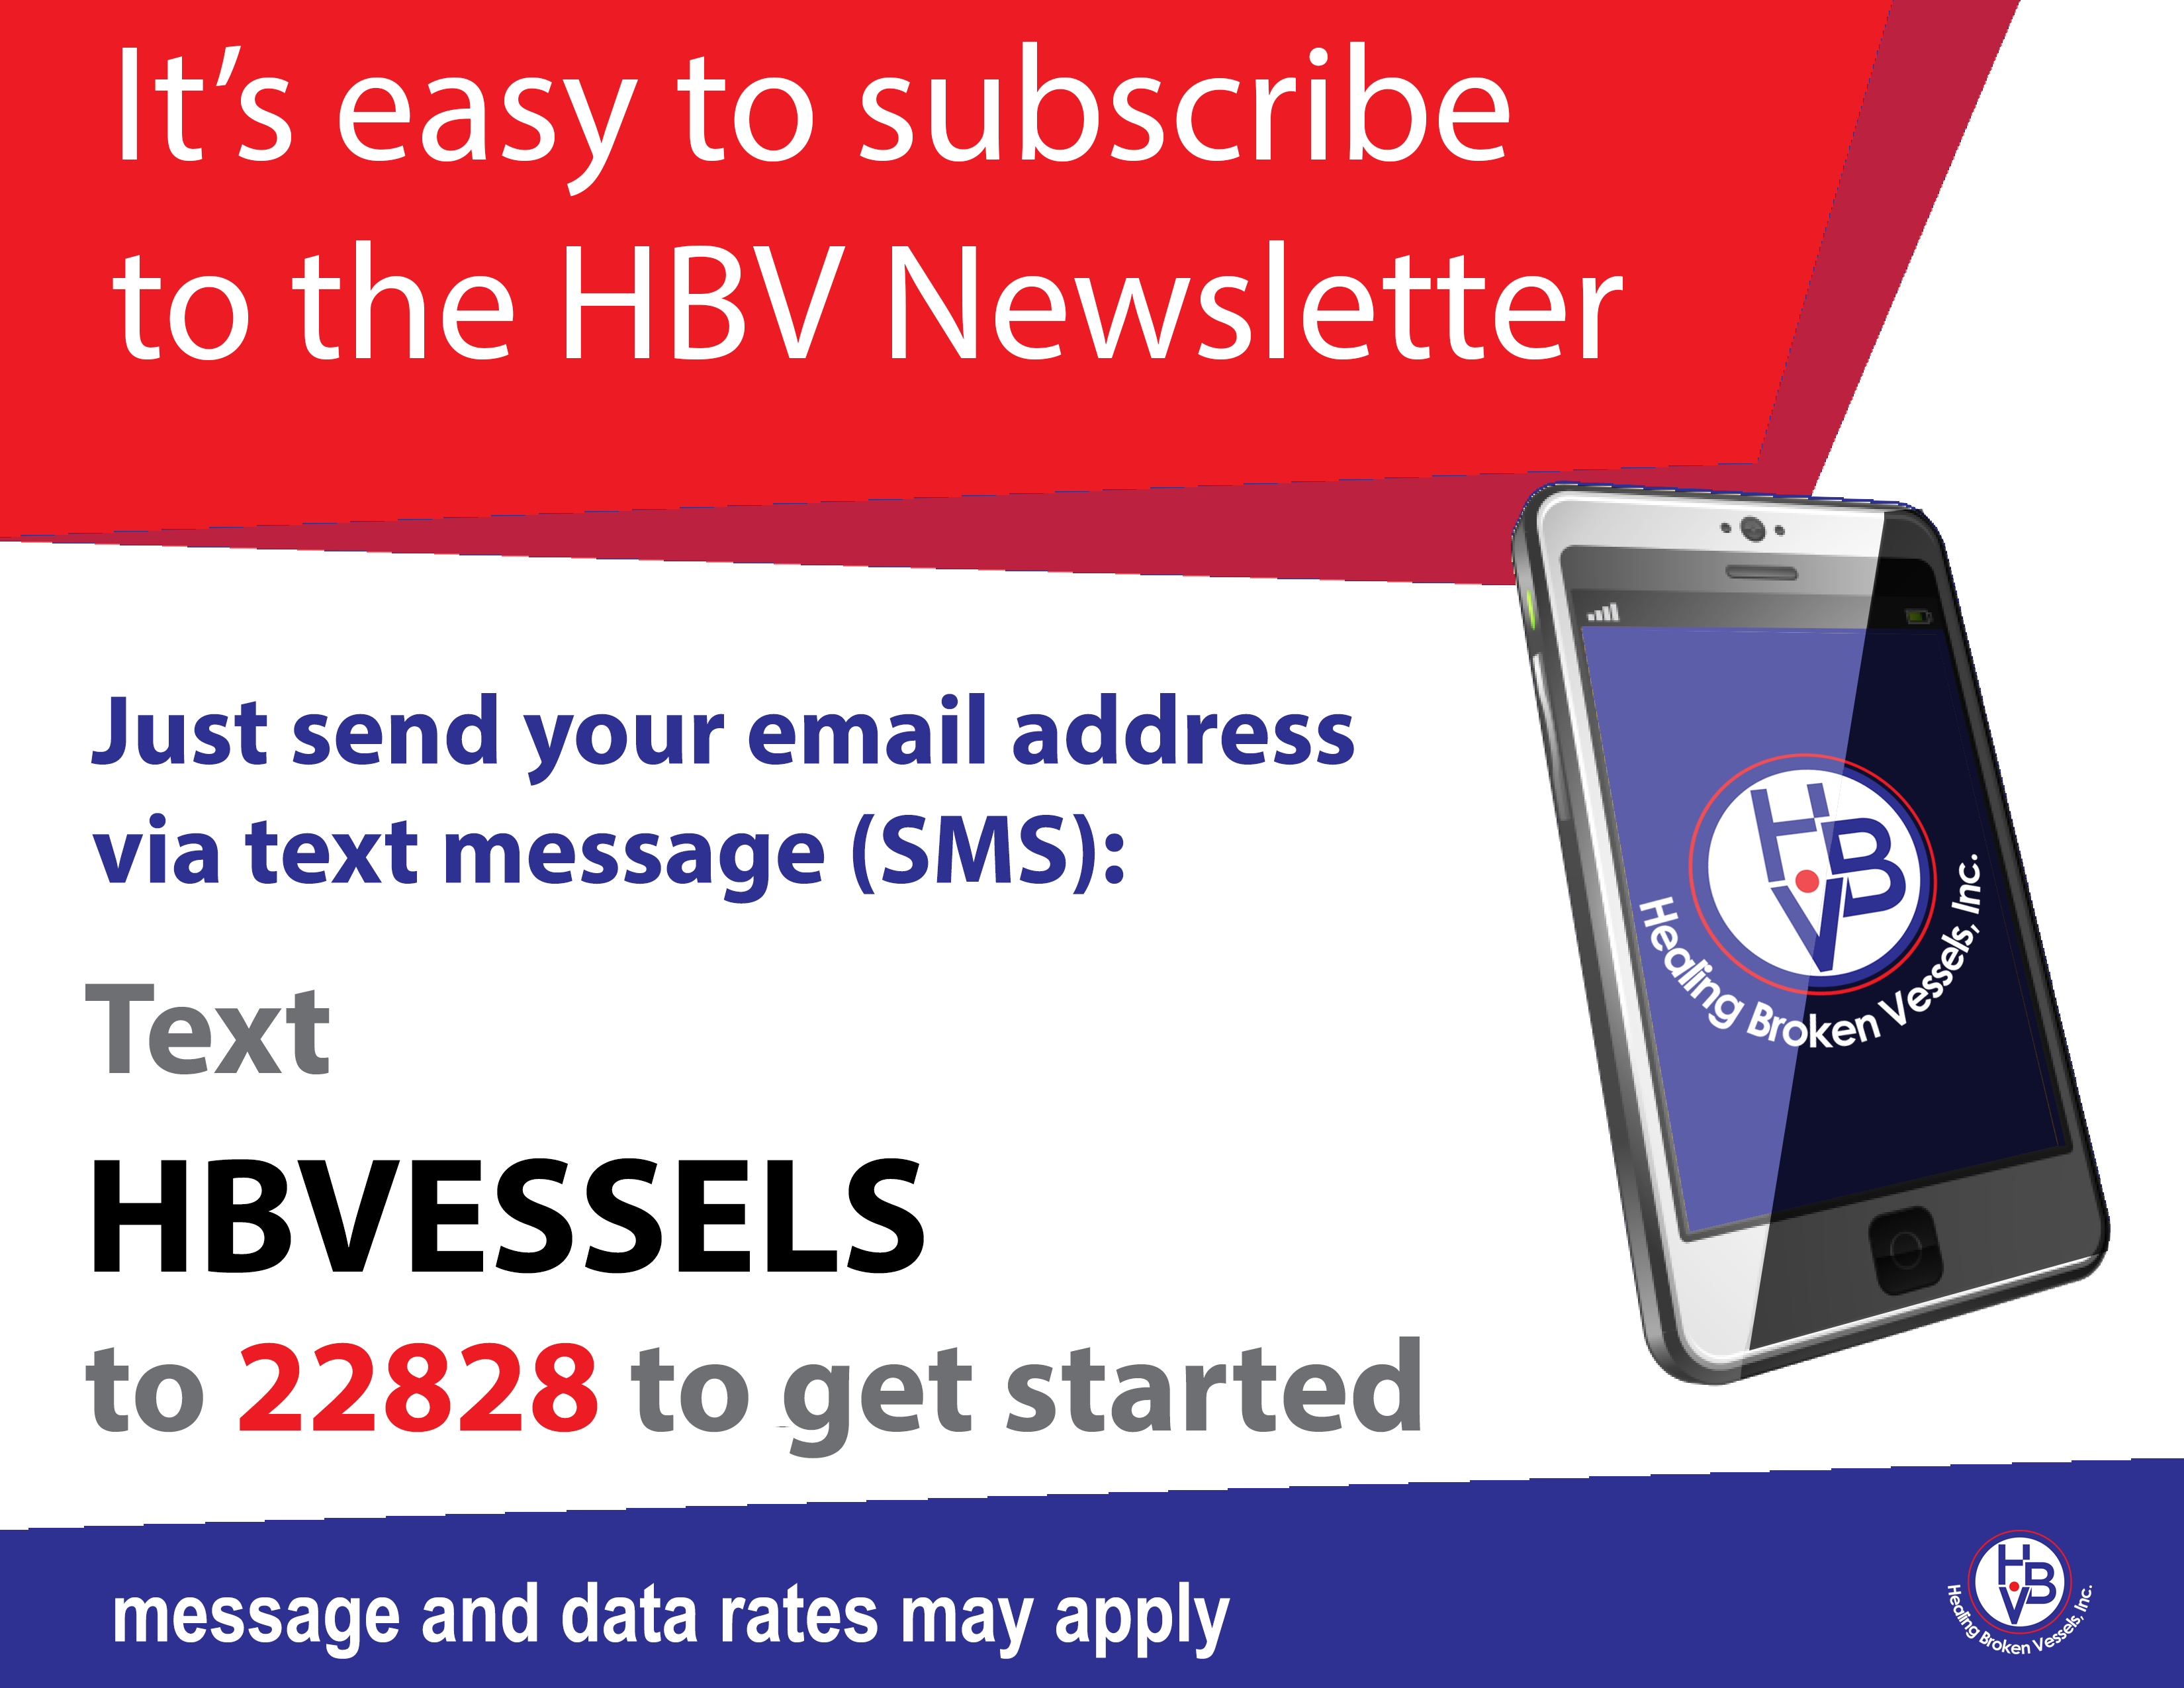 Subscribe to the HBV Newsletter Via Text (SMS)